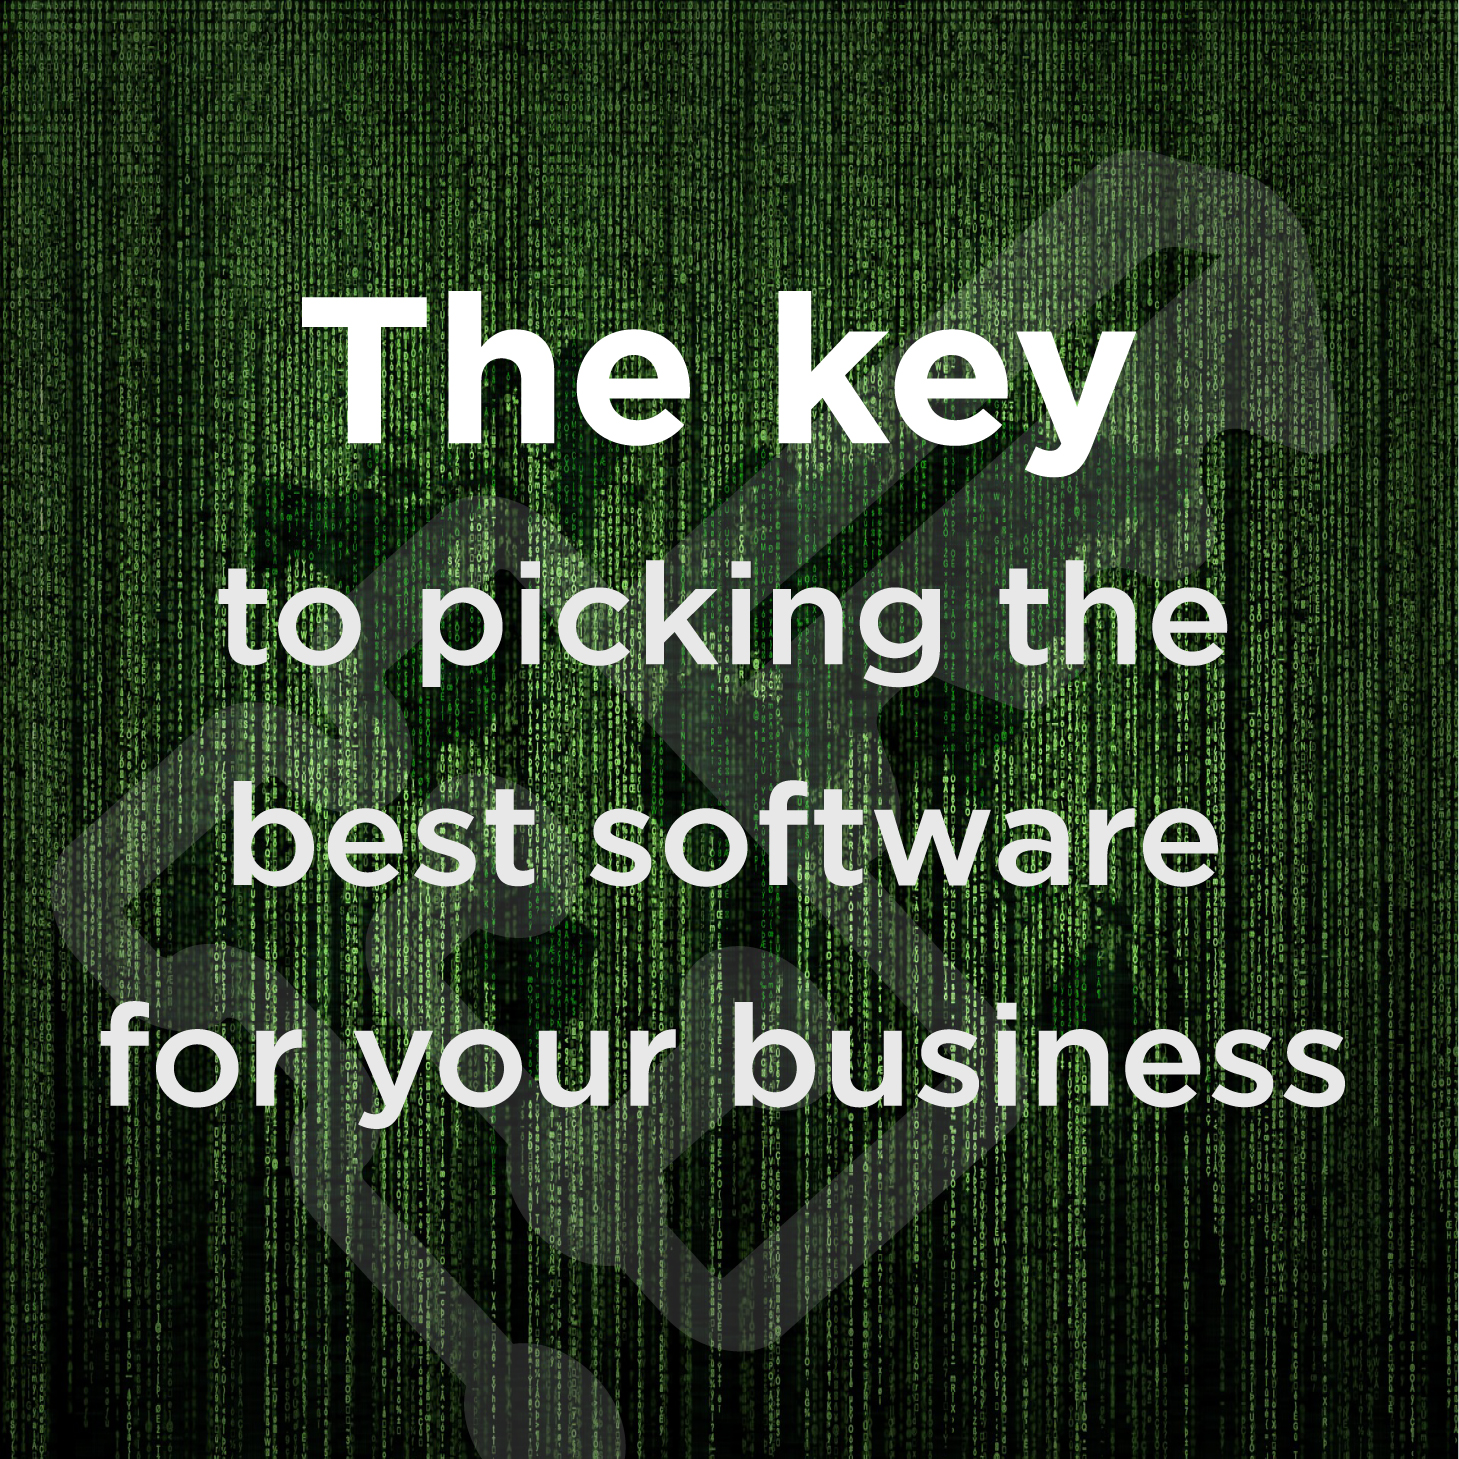 the key is picking the best software for your business